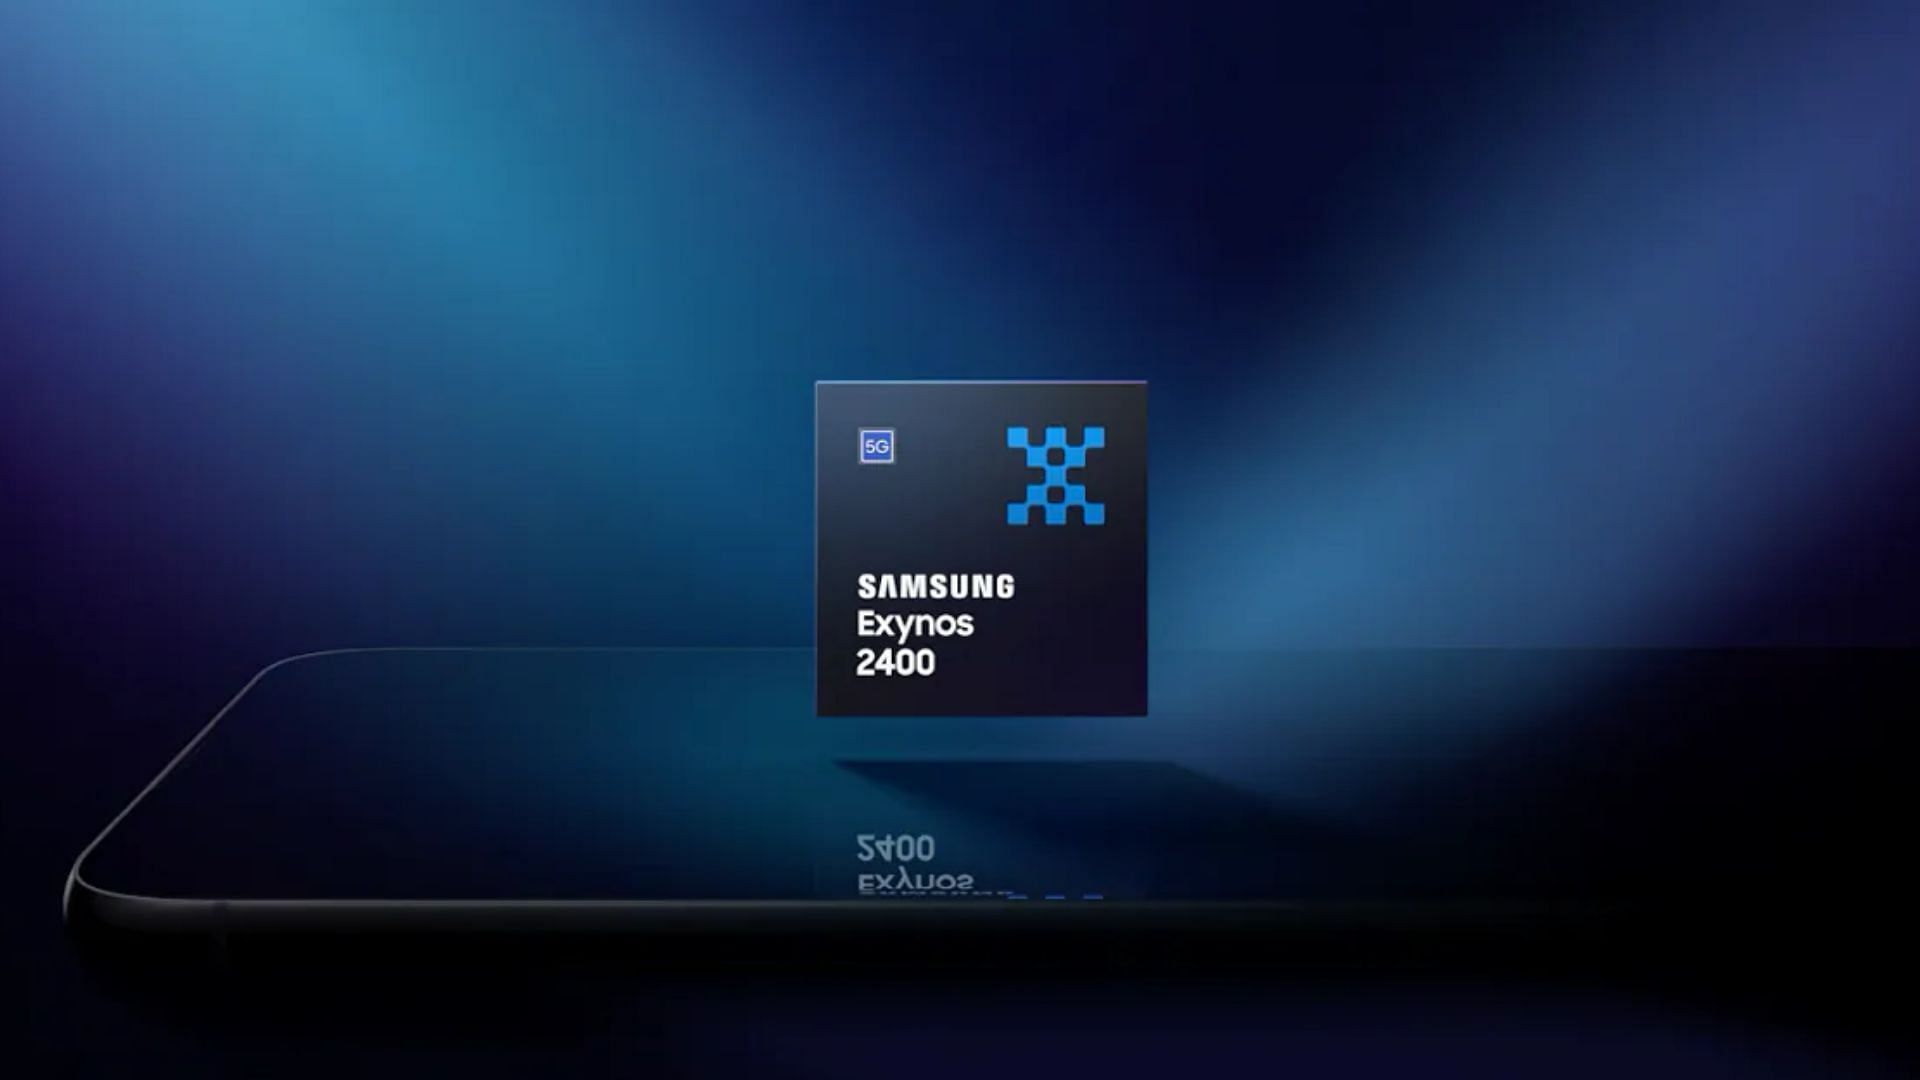 Both chipsets are very optimal (Image via Samsung)